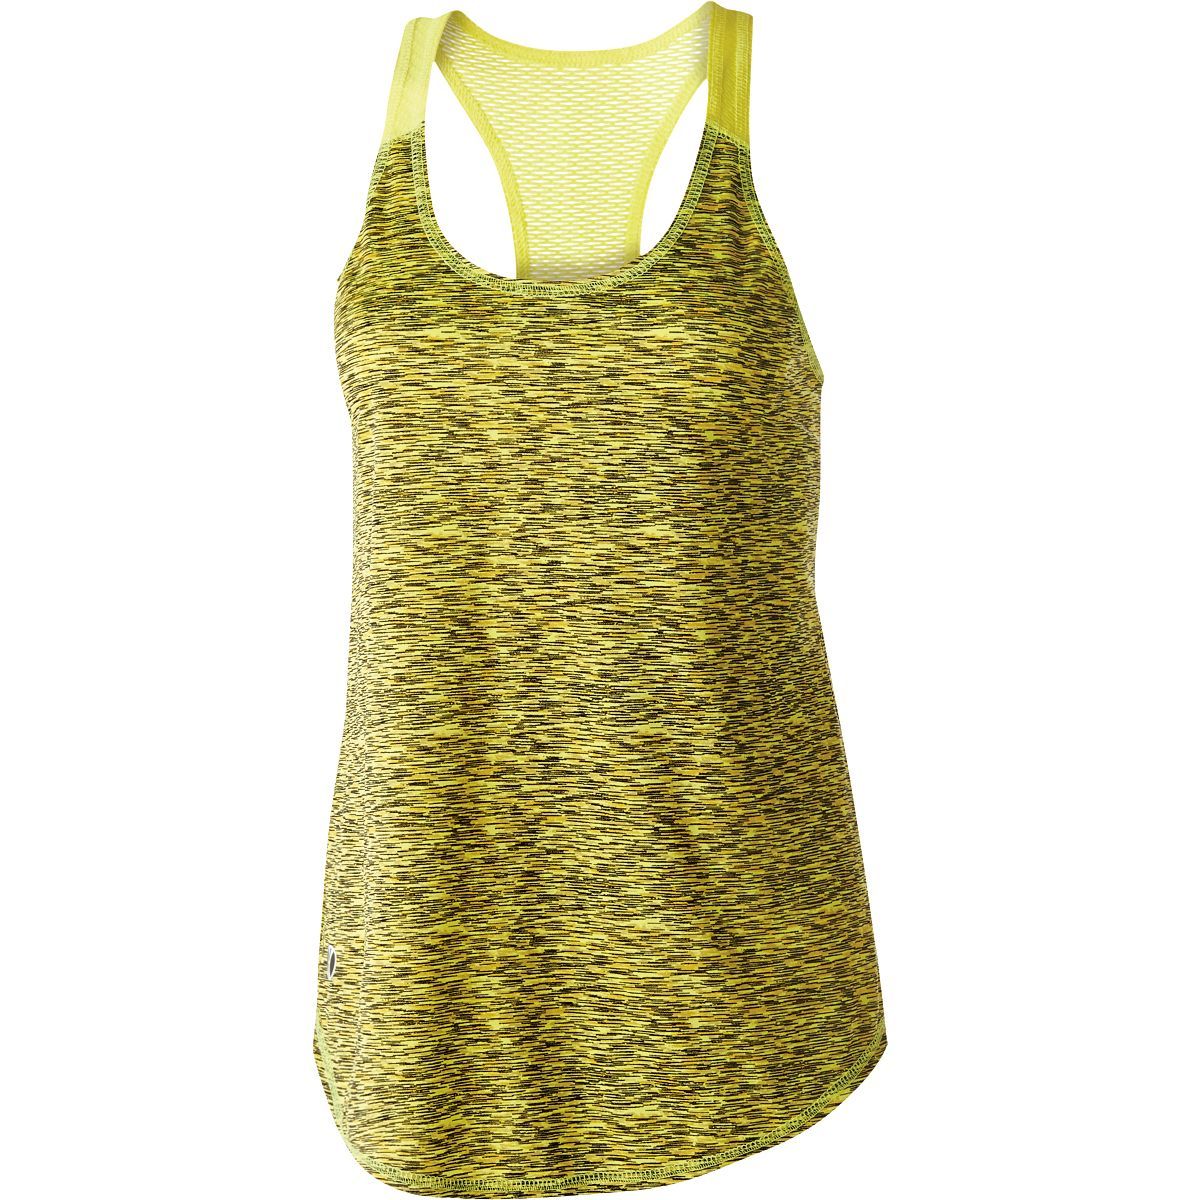 Holloway Ladies Space Dye Tank in Yellow/Bright Yellow  -Part of the Ladies, Ladies-Tank, Holloway, Shirts product lines at KanaleyCreations.com